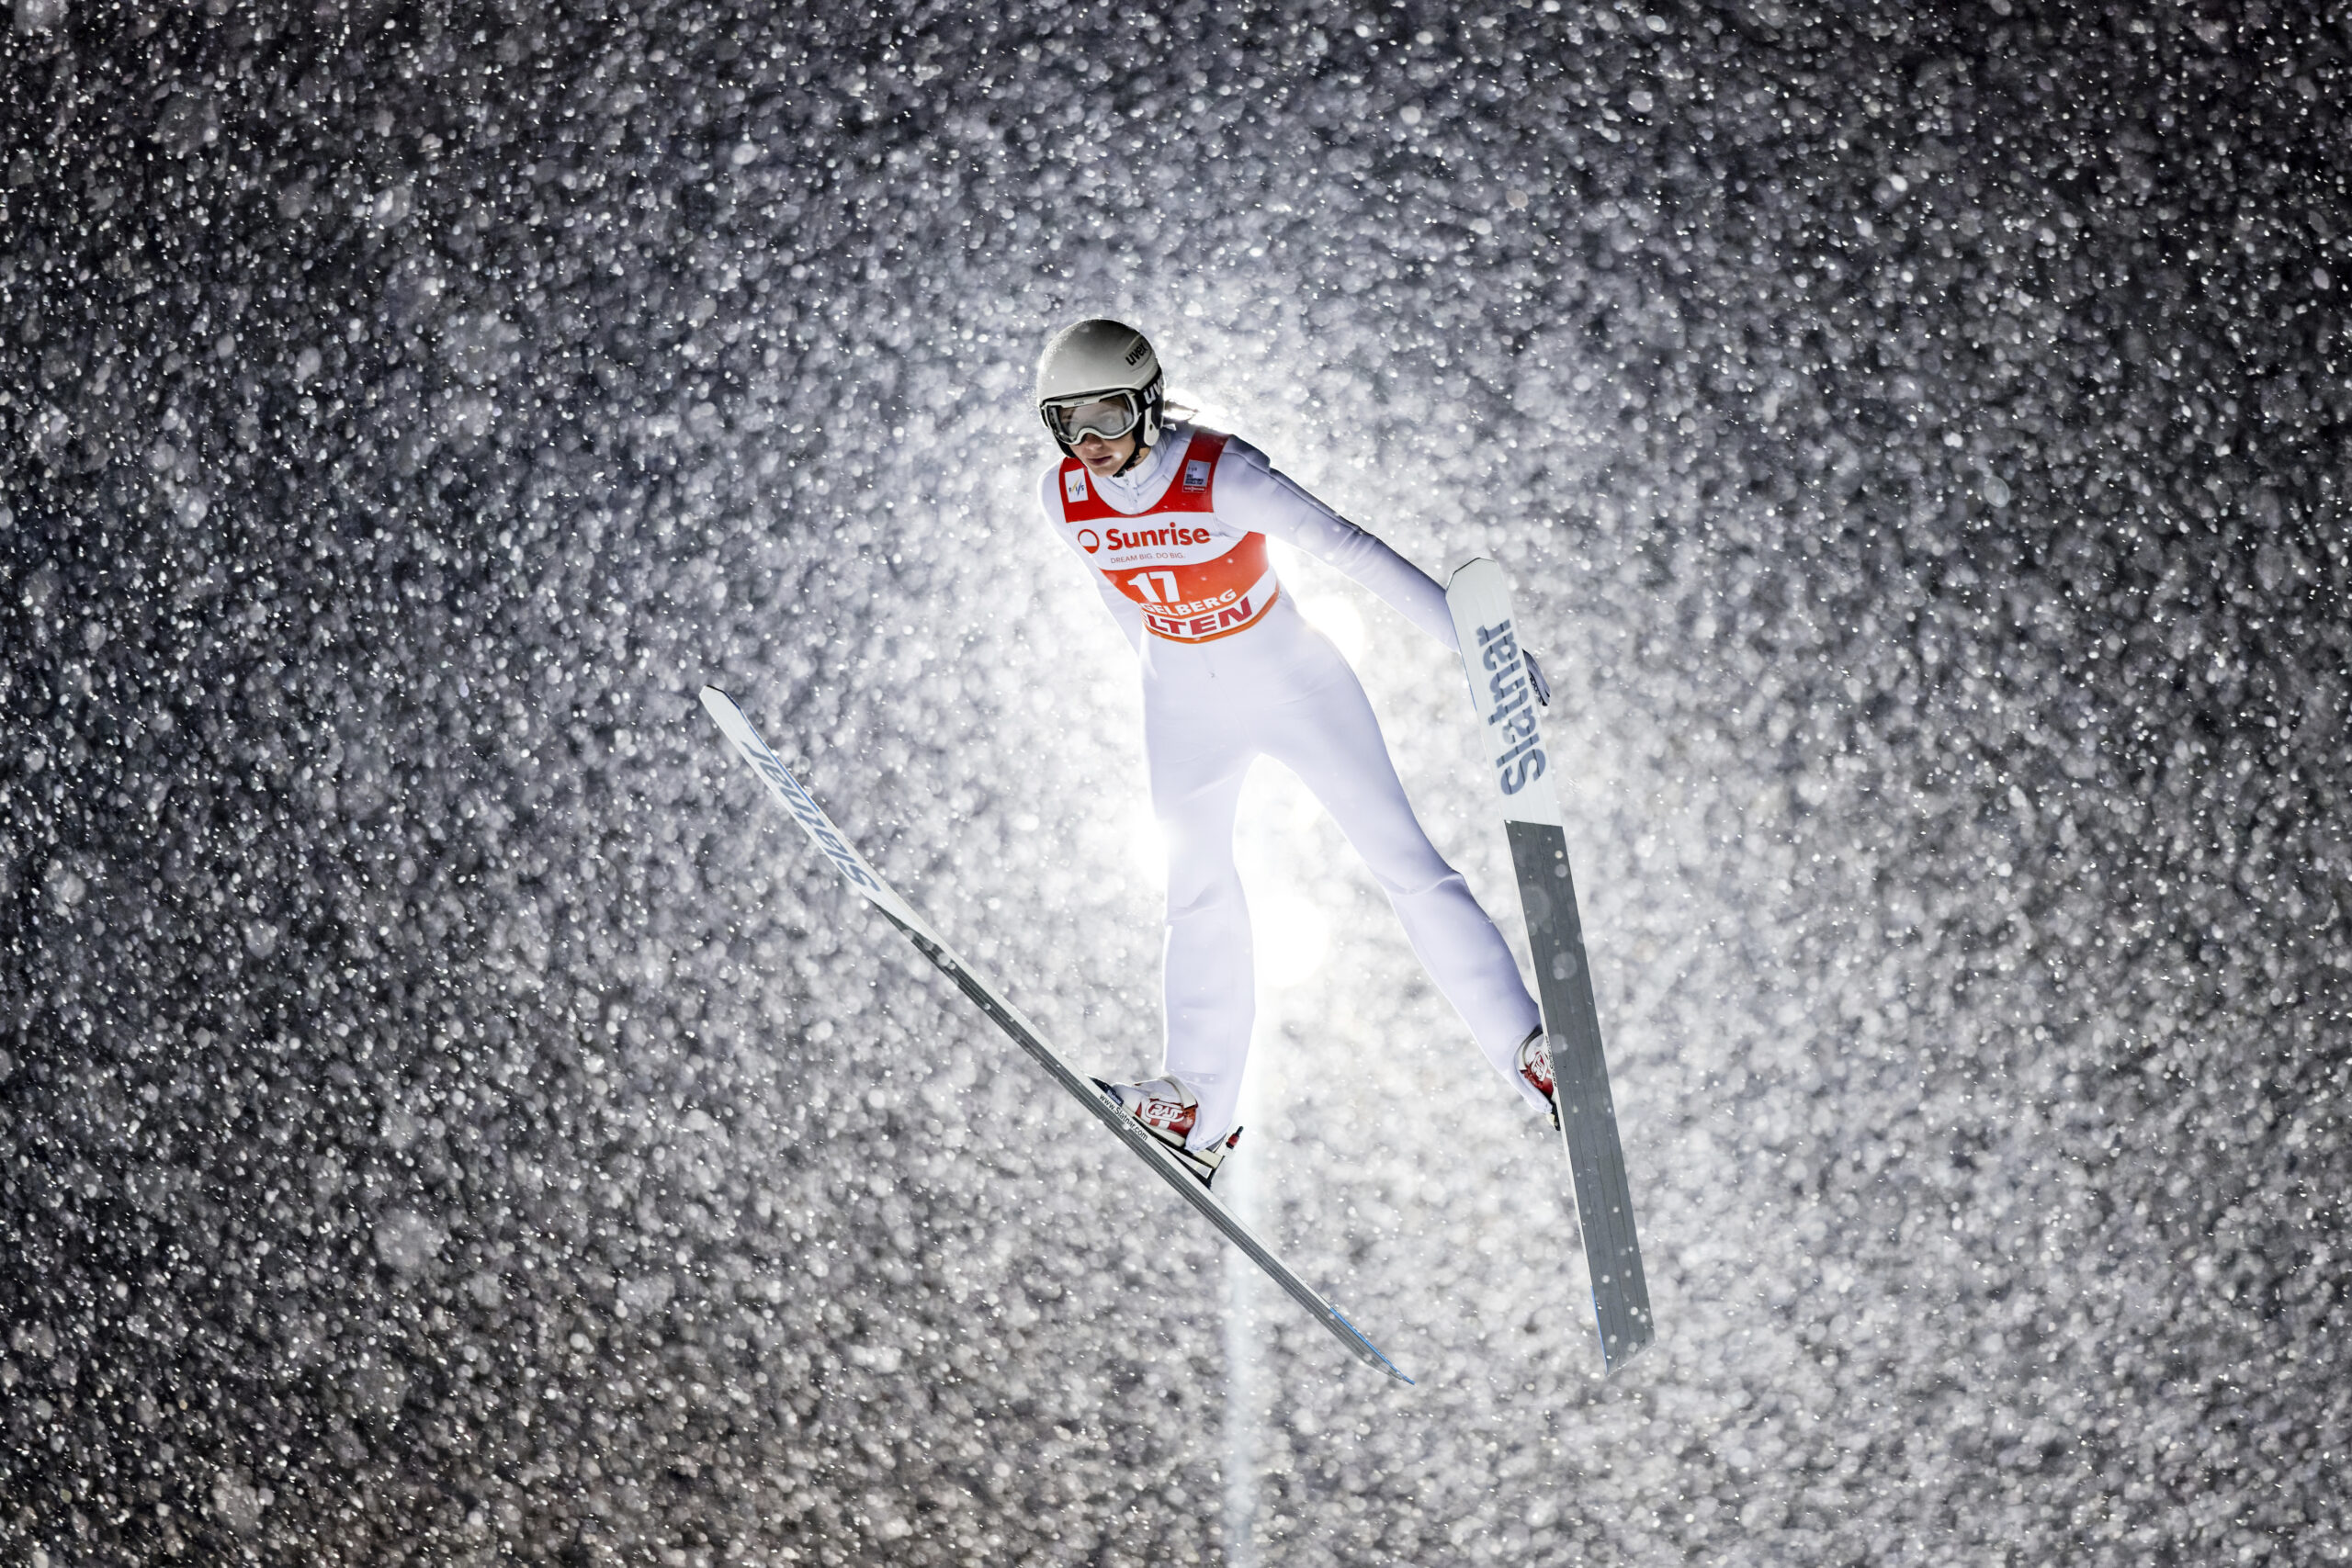 SWITZERLAND — A champion flies amid beautiful snowflakes: Daniela Haralambie of Romania competes during the qualification of the women's FIS Ski Jumping World Cup competition at the Gross-Titlis Schanze in Engelberg, Switzerland, Thursday, Dec. 14, 2023.Photo: Philipp Schmidli/Keystone via AP